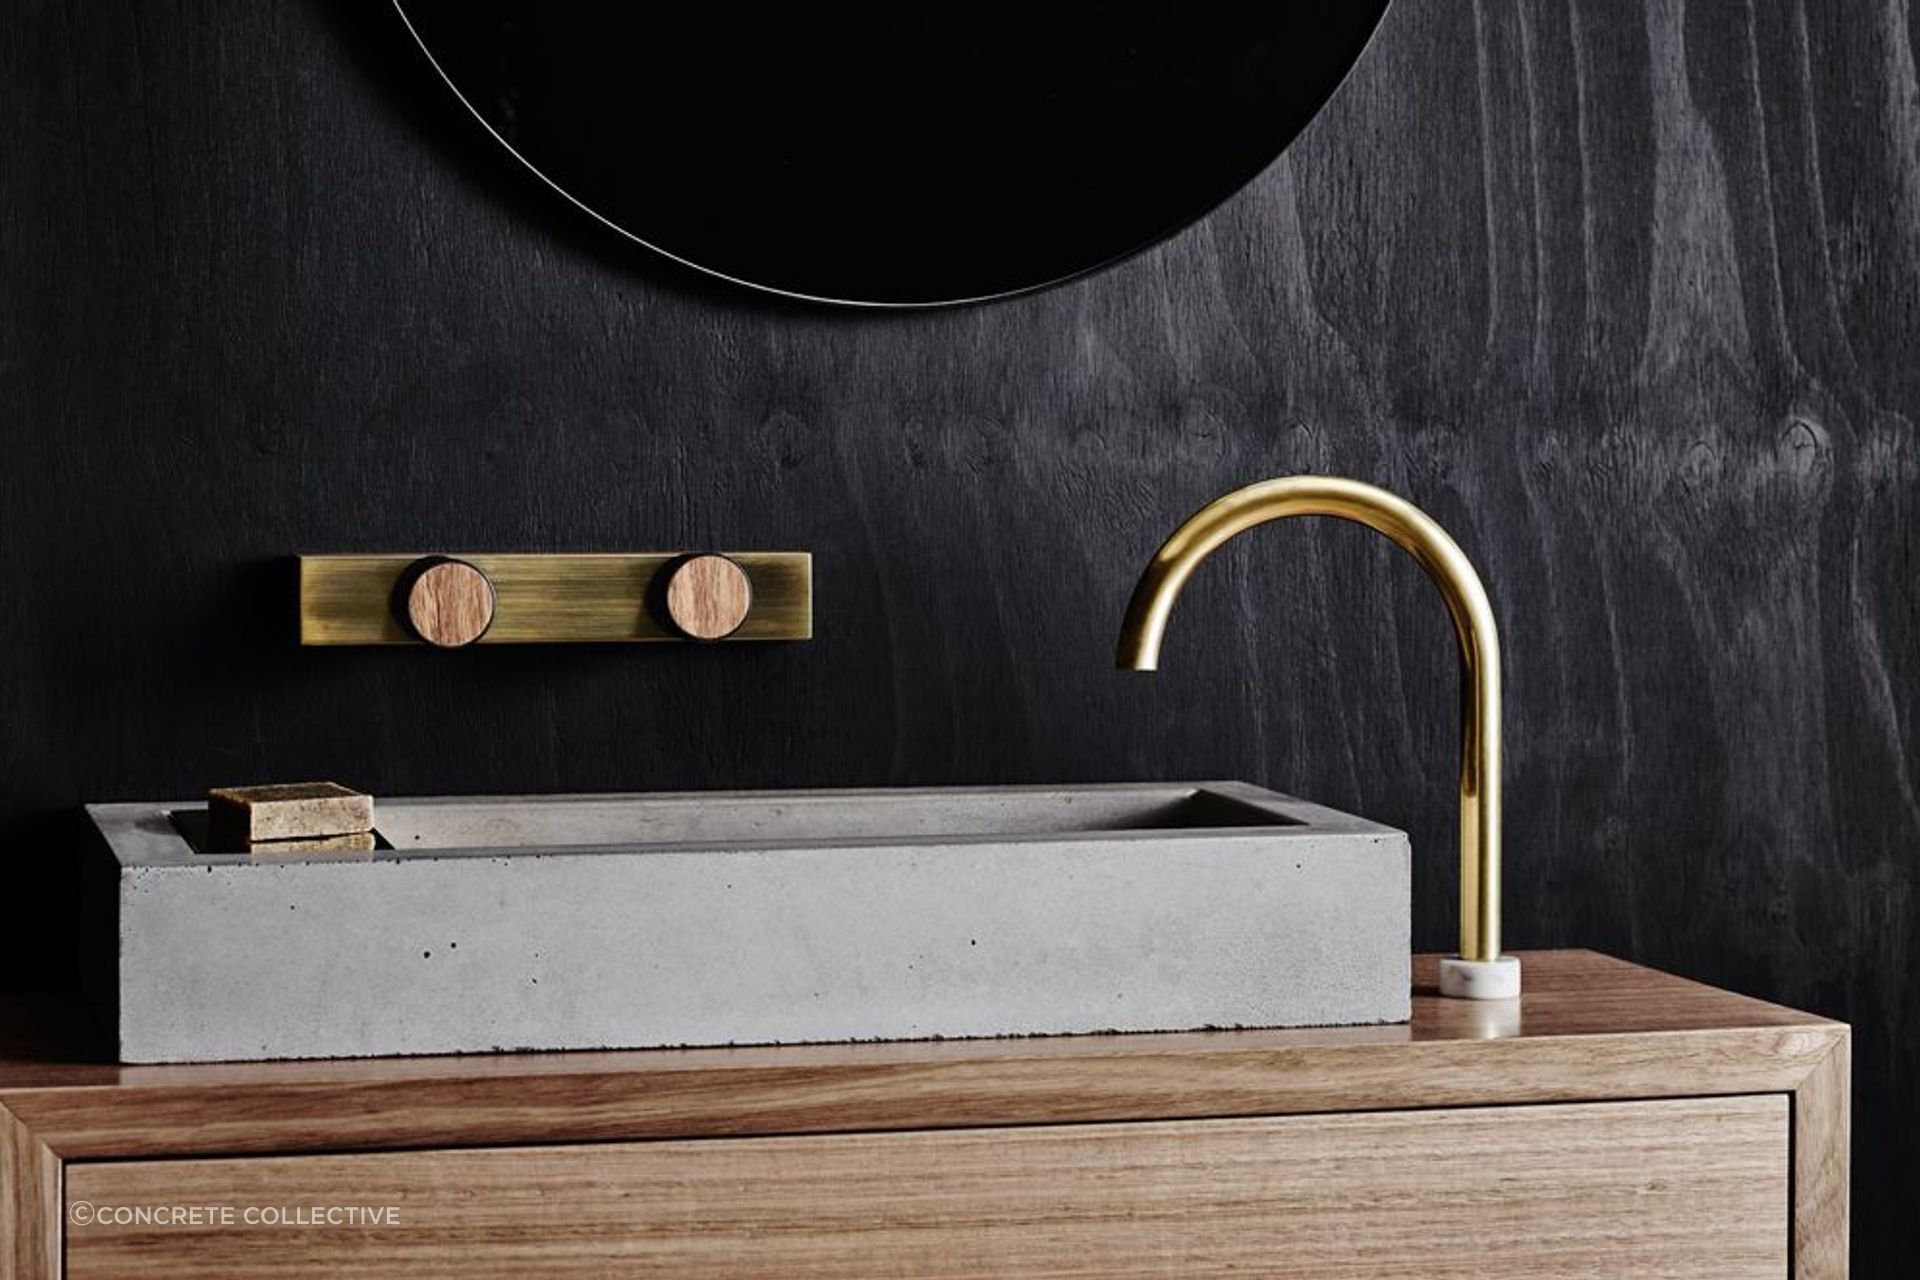 Featured Product: Wood Melbourne Leo Round Brass &amp; Timber Taps by Concrete Collective